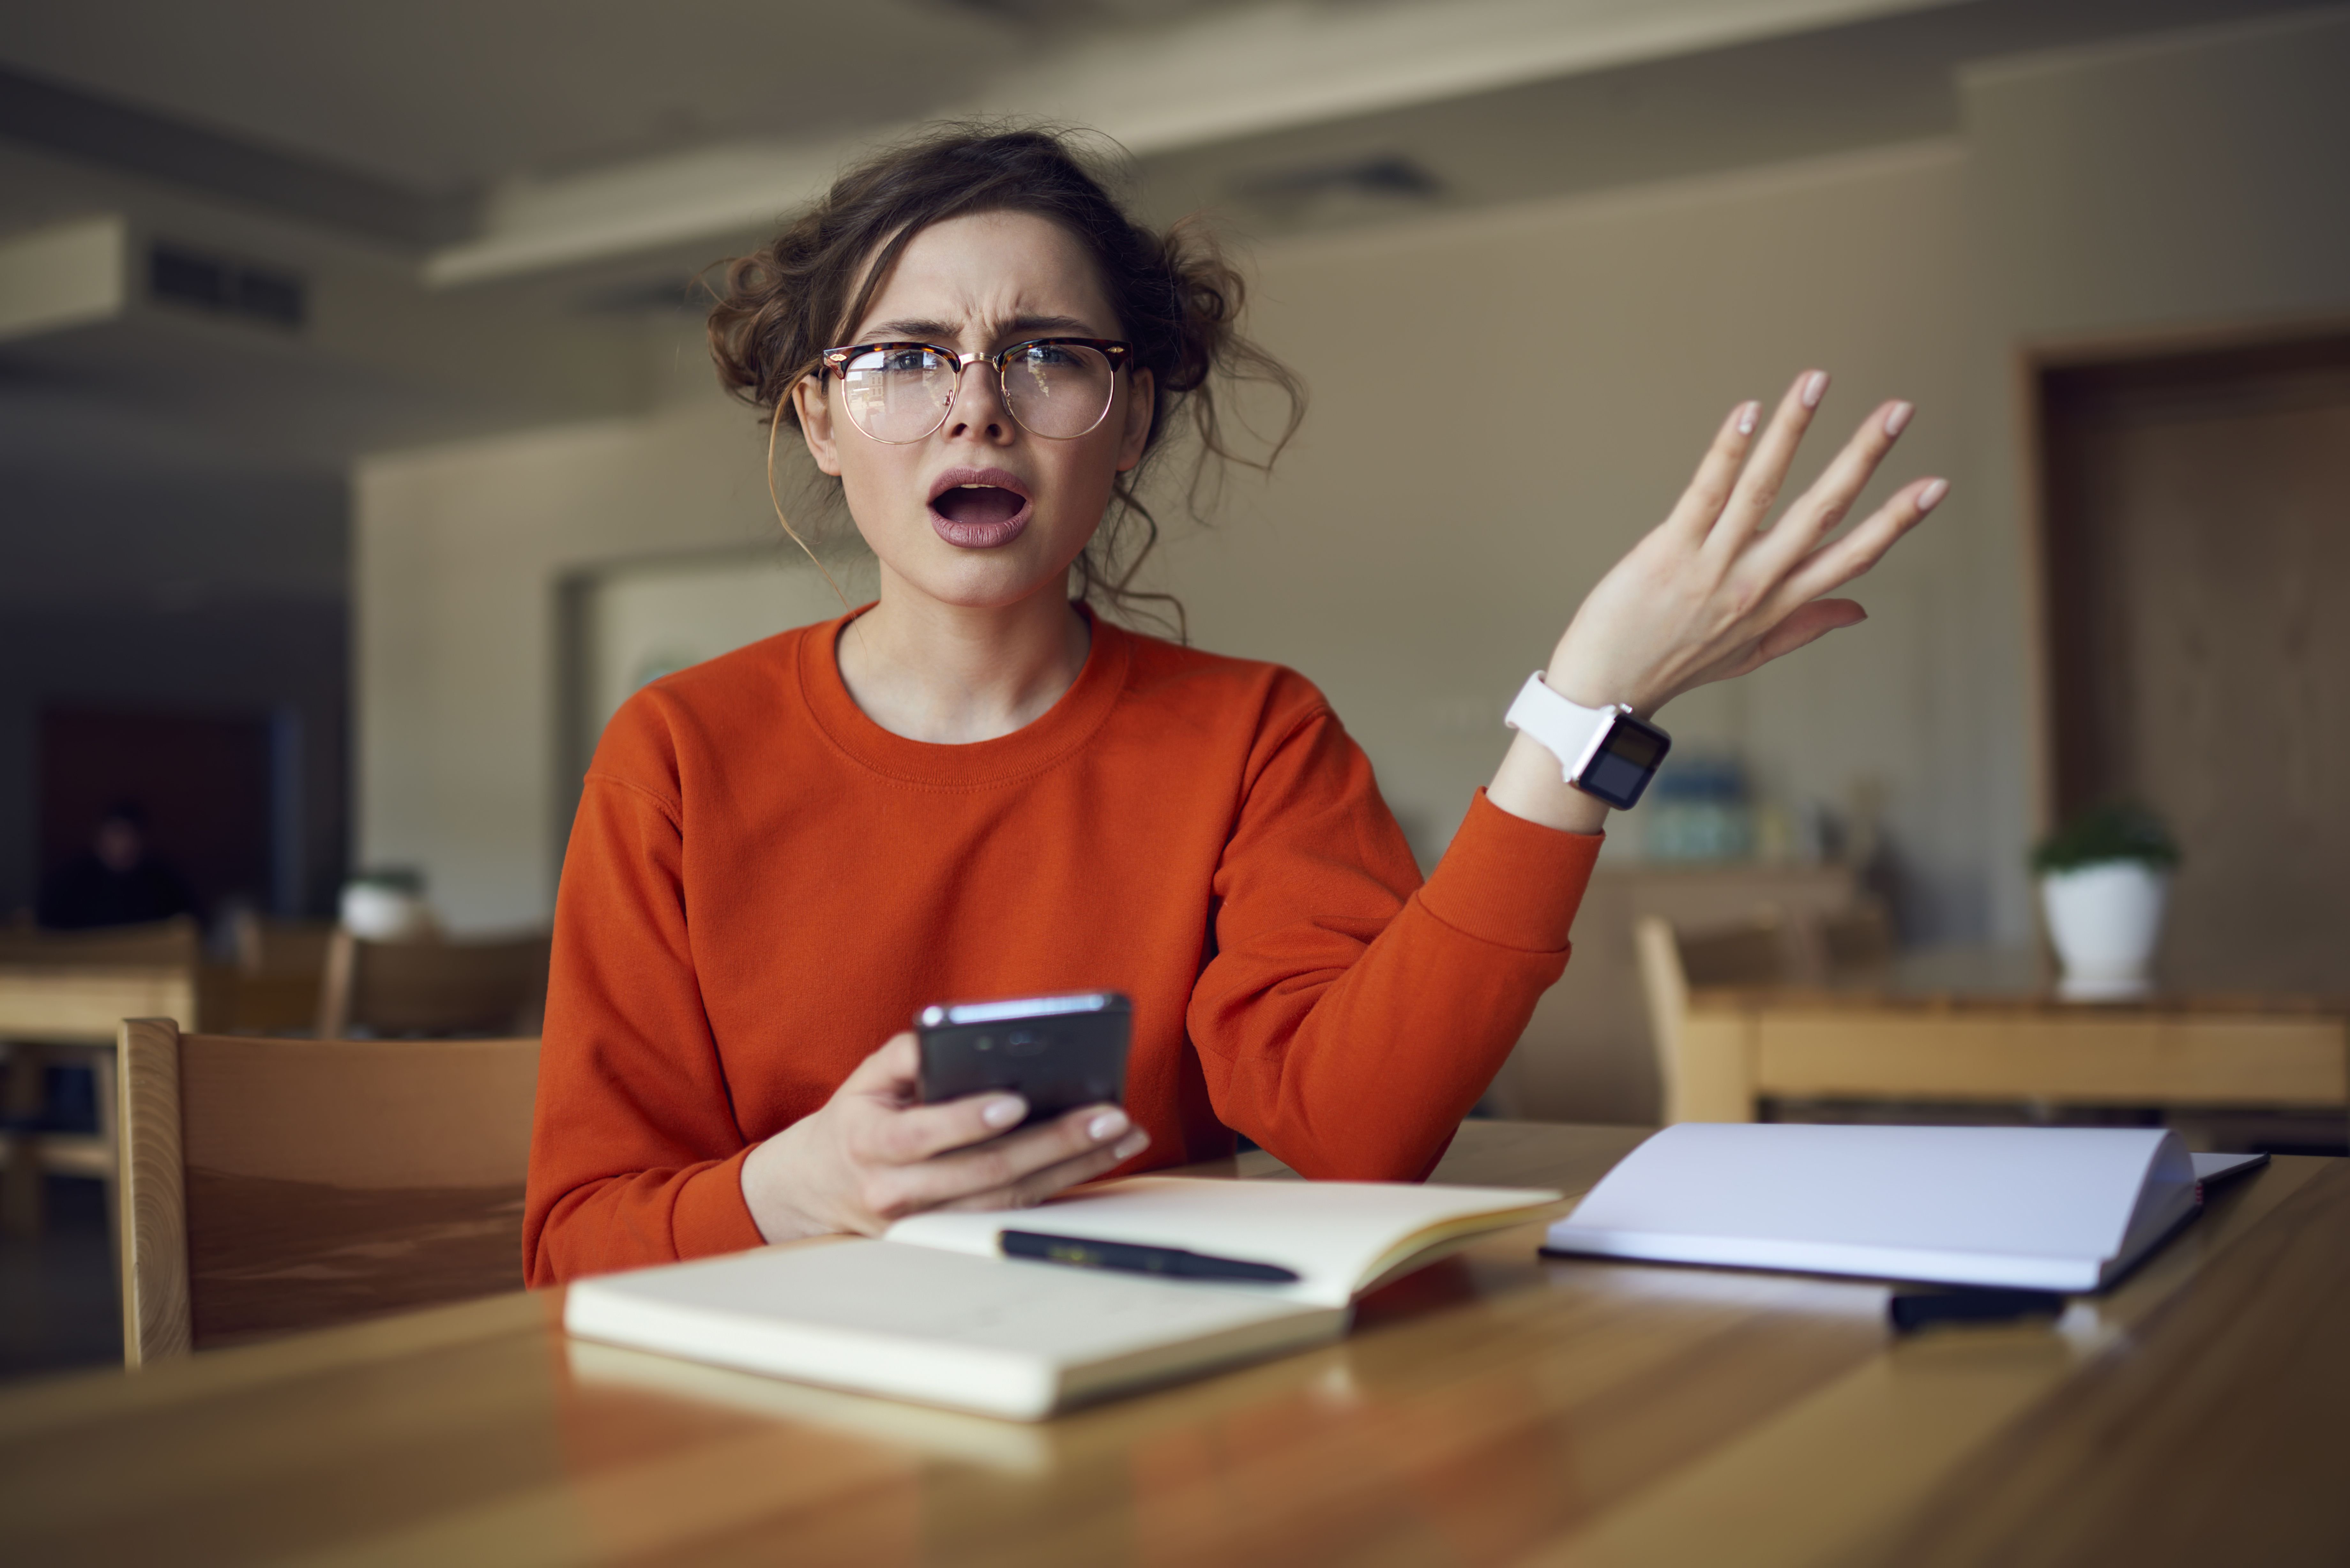 A woman looks shocked while holding her phone. | Source: Shutterstock